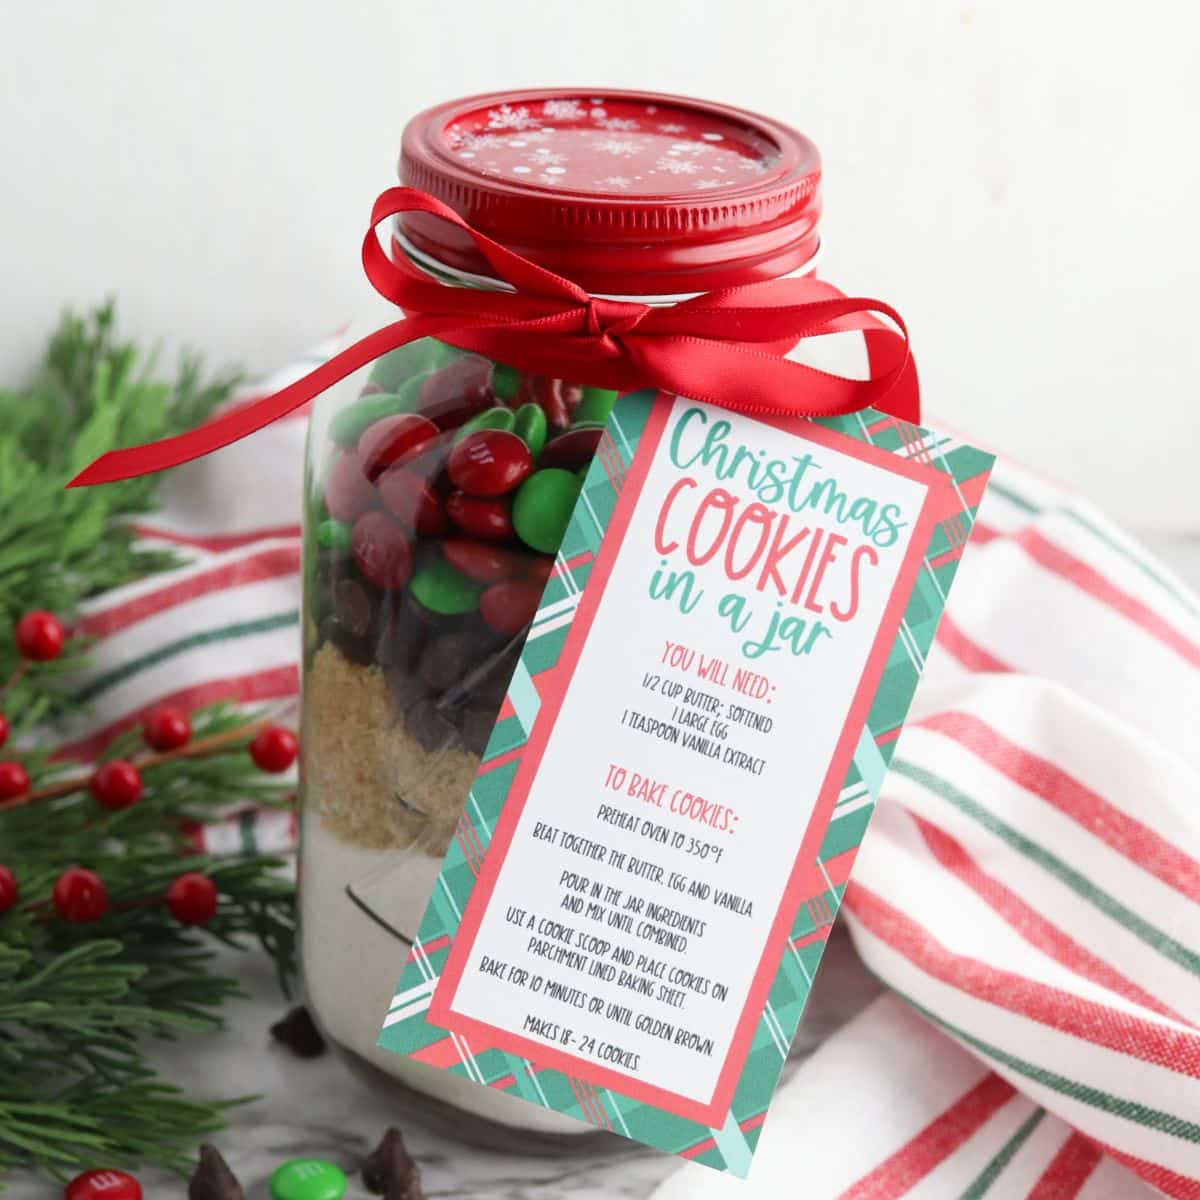 https://walkingonsunshinerecipes.com/wp-content/uploads/2022/11/FEATURED-NEW-SIZE-Christmas-Cookies-in-a-Jar.-.jpg